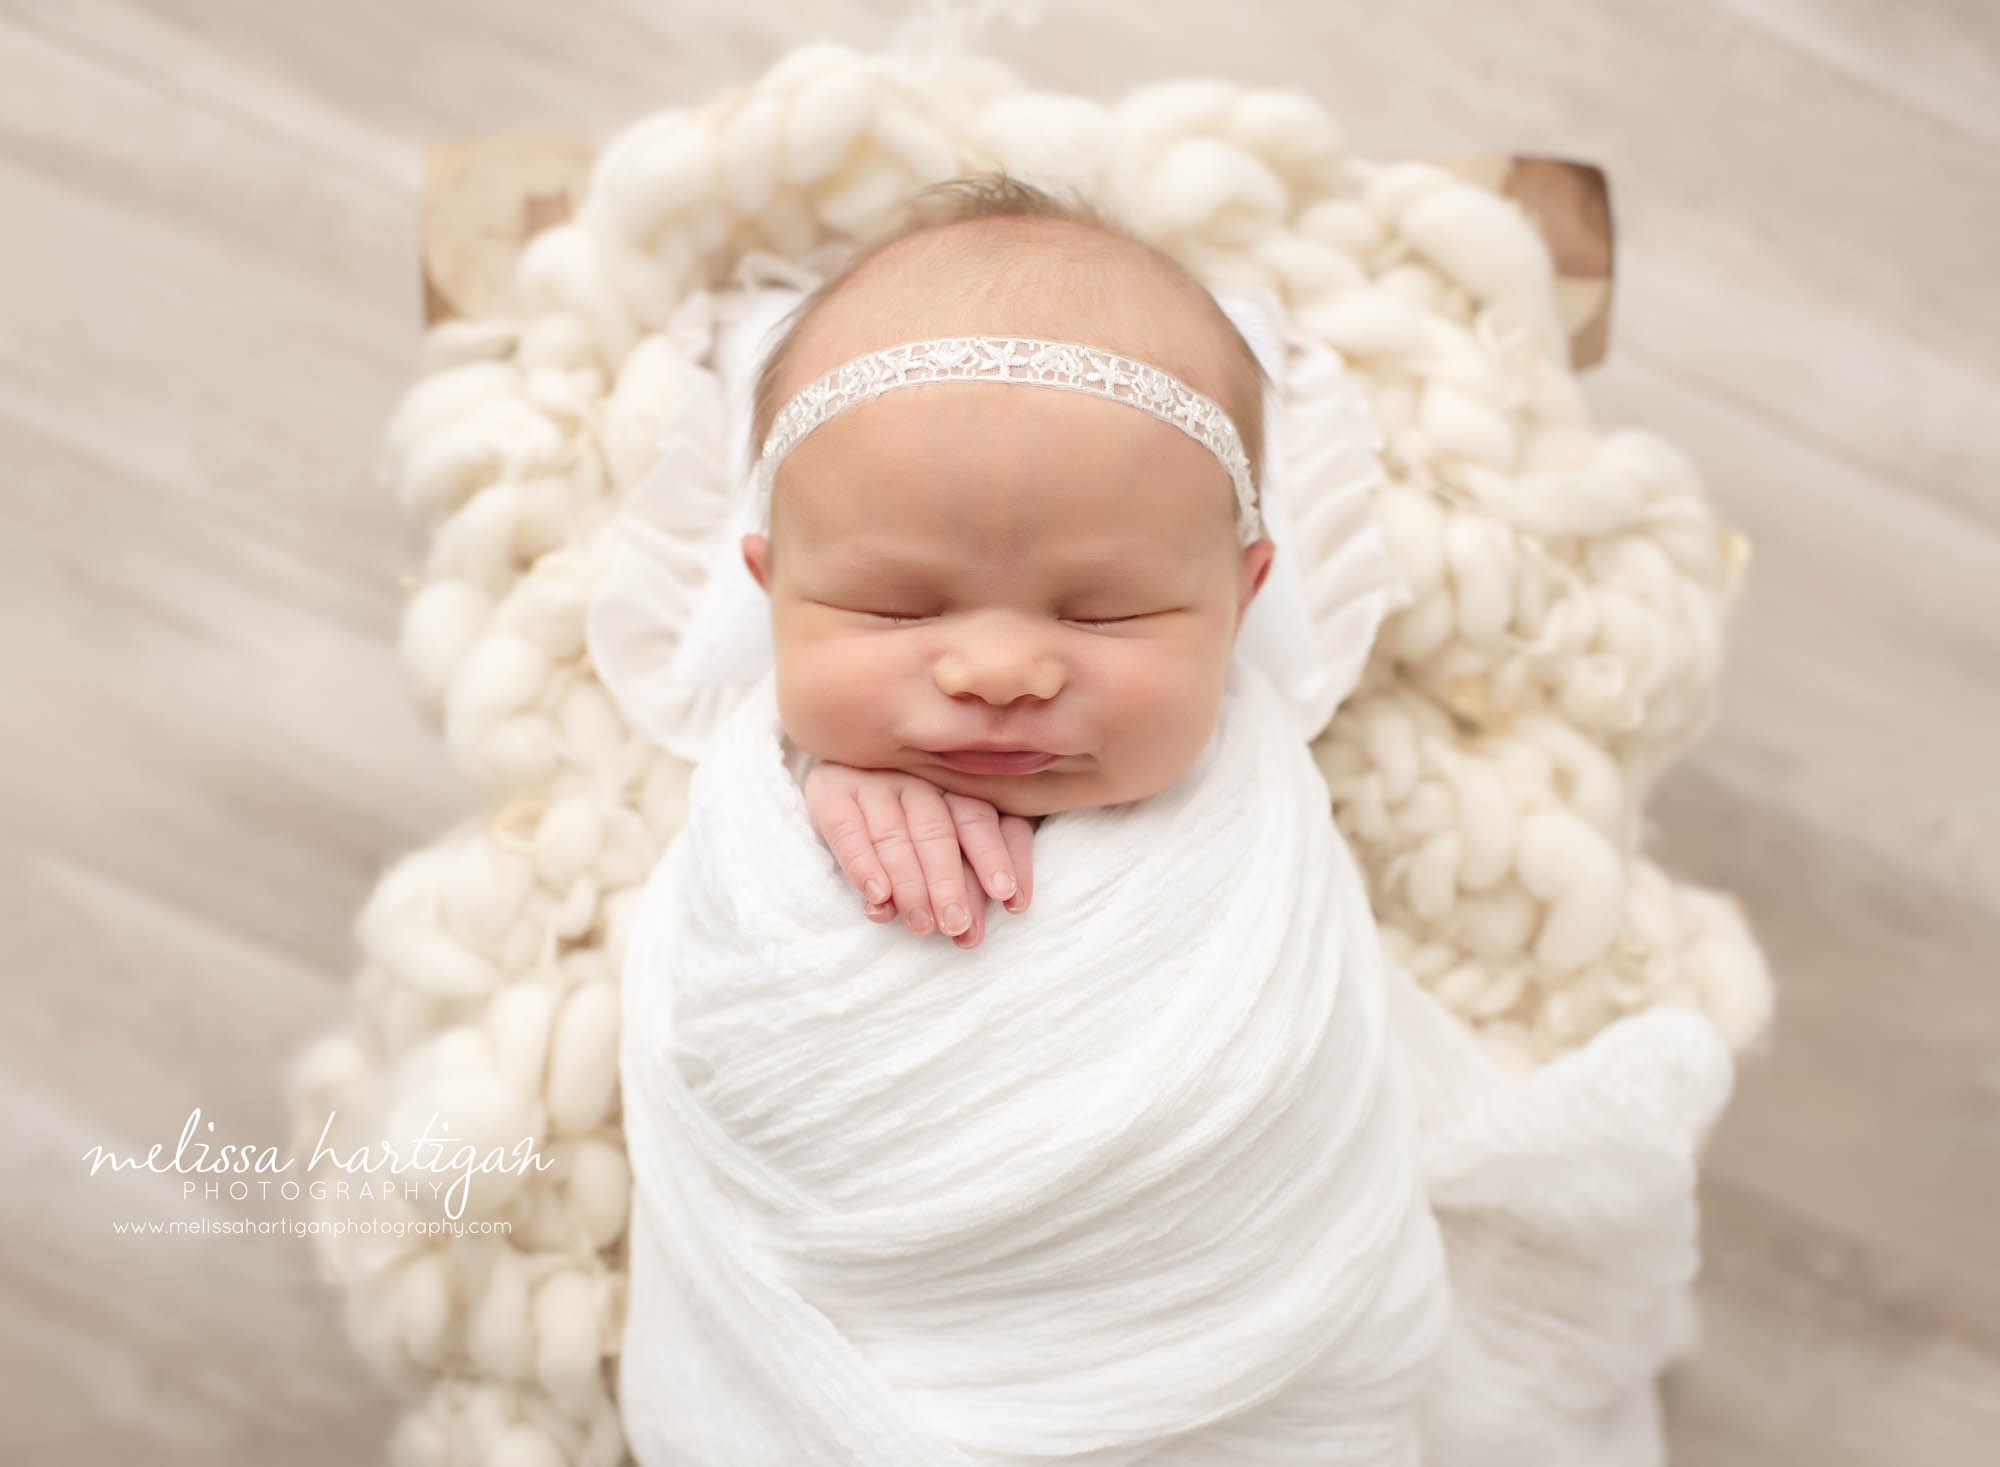 Baby girl smiling in white wrap laying on cream colored textured layer